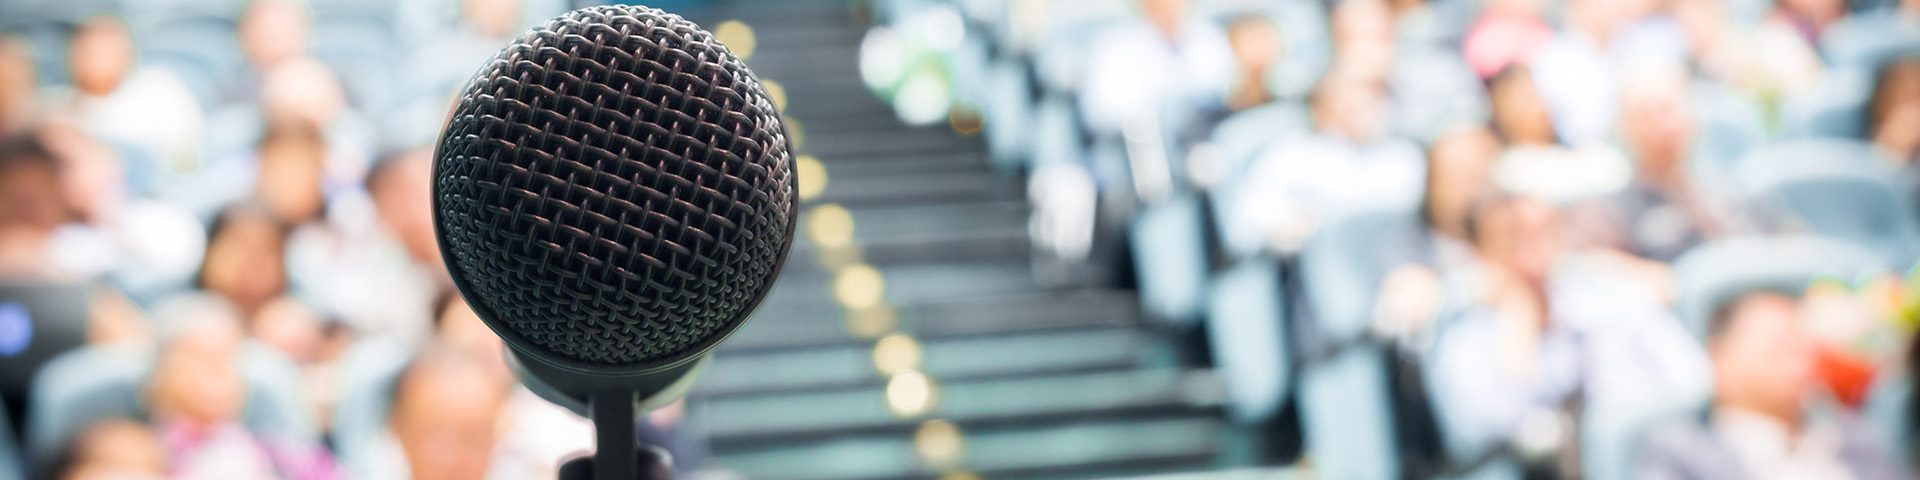 Microphone in front of an auditorium of people. Image courtesy of Getty Images